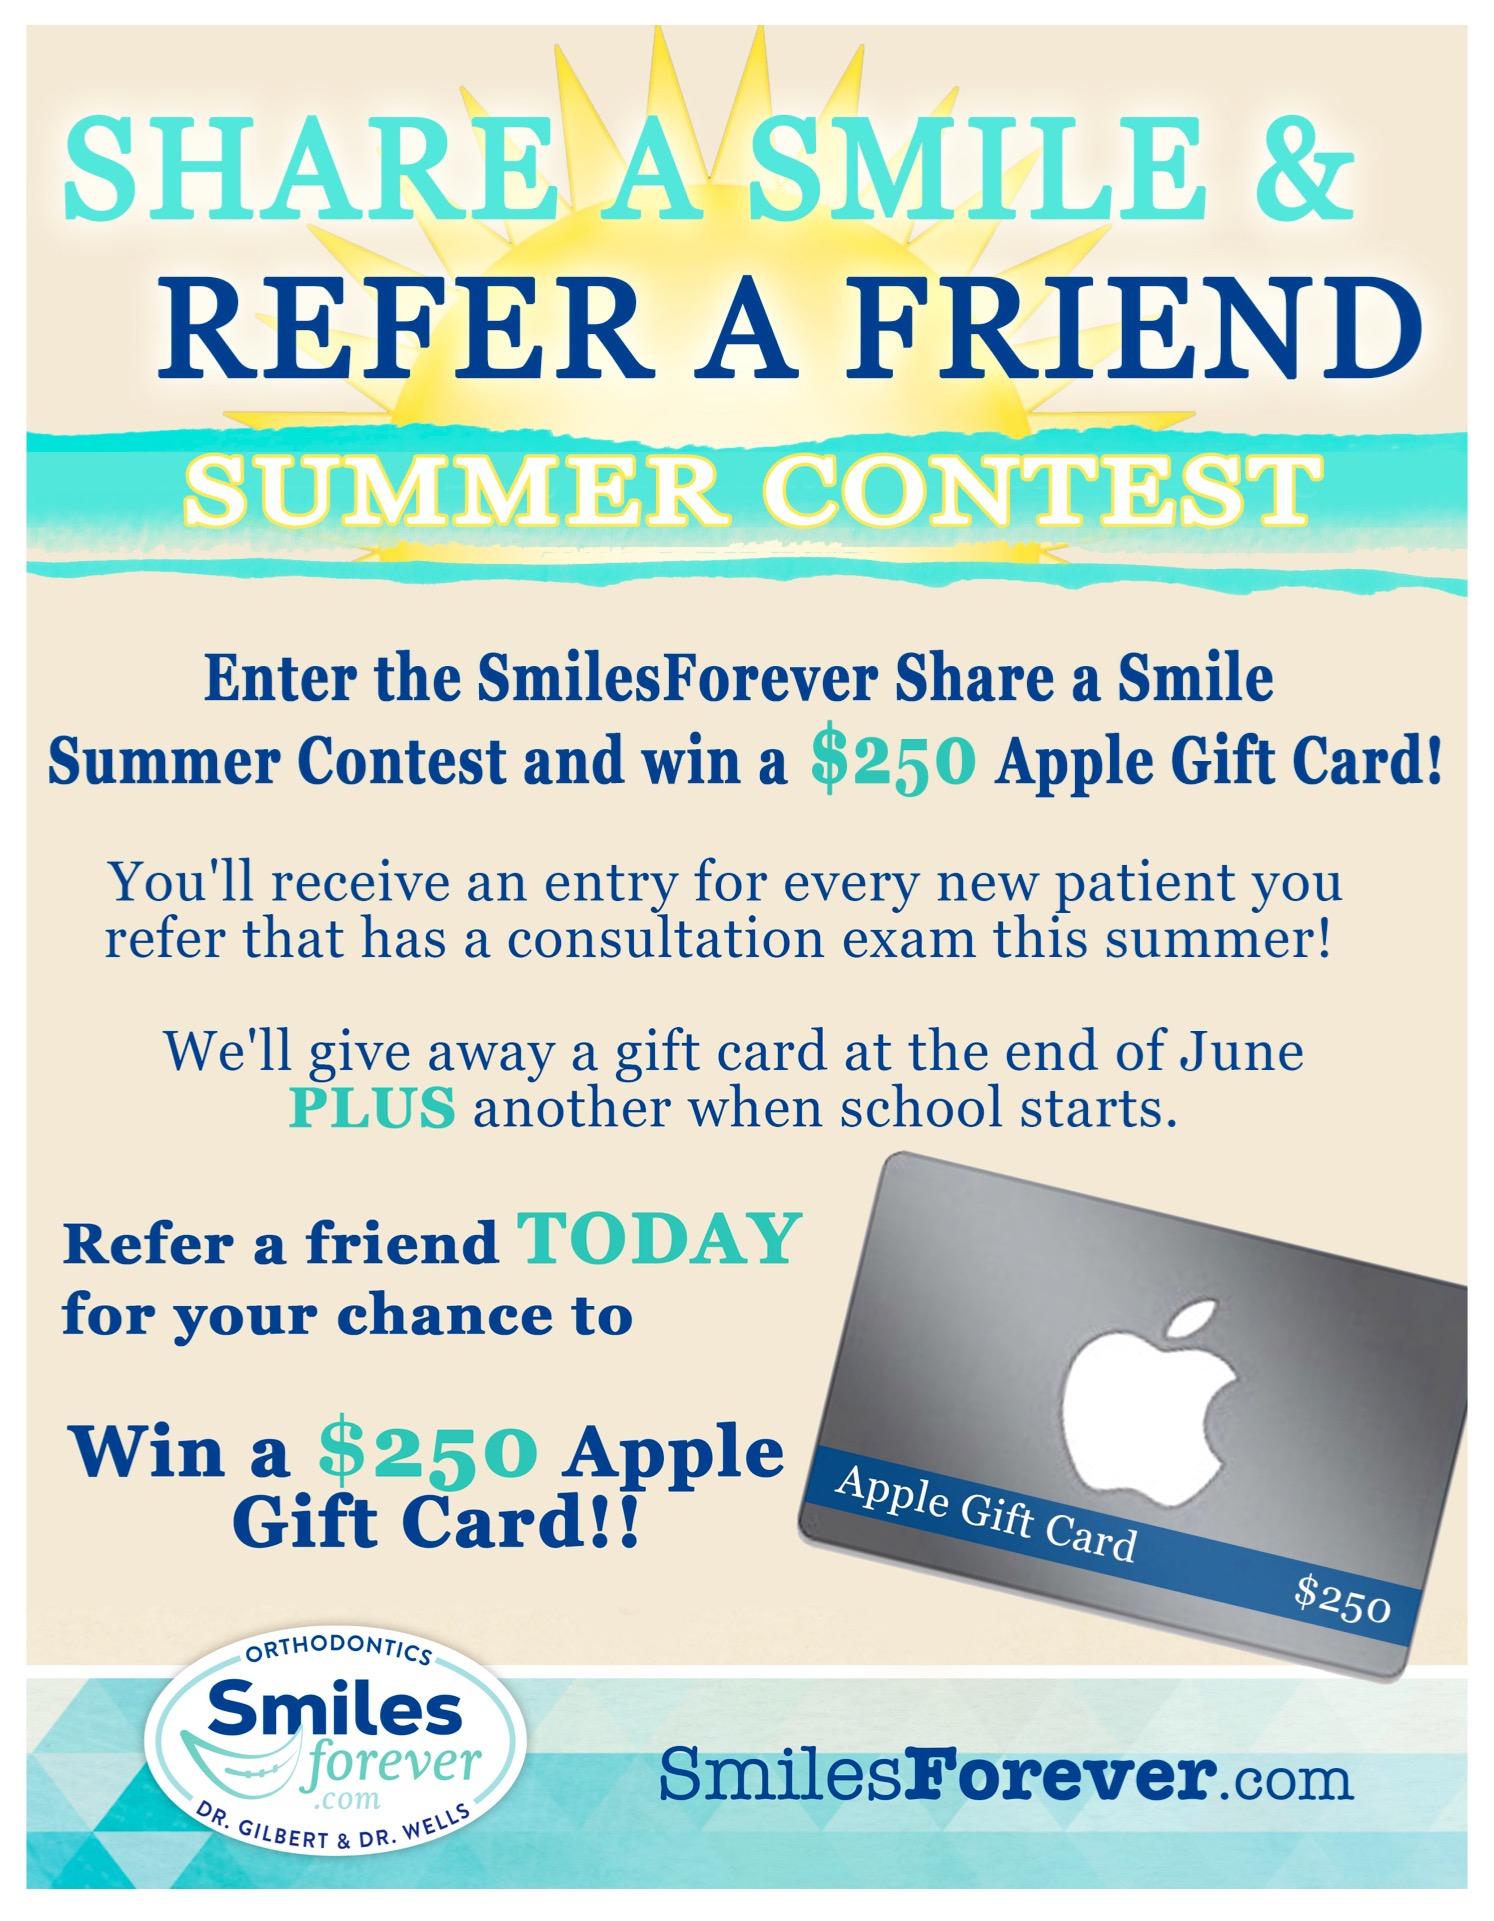 Share Your Smile and WIN!